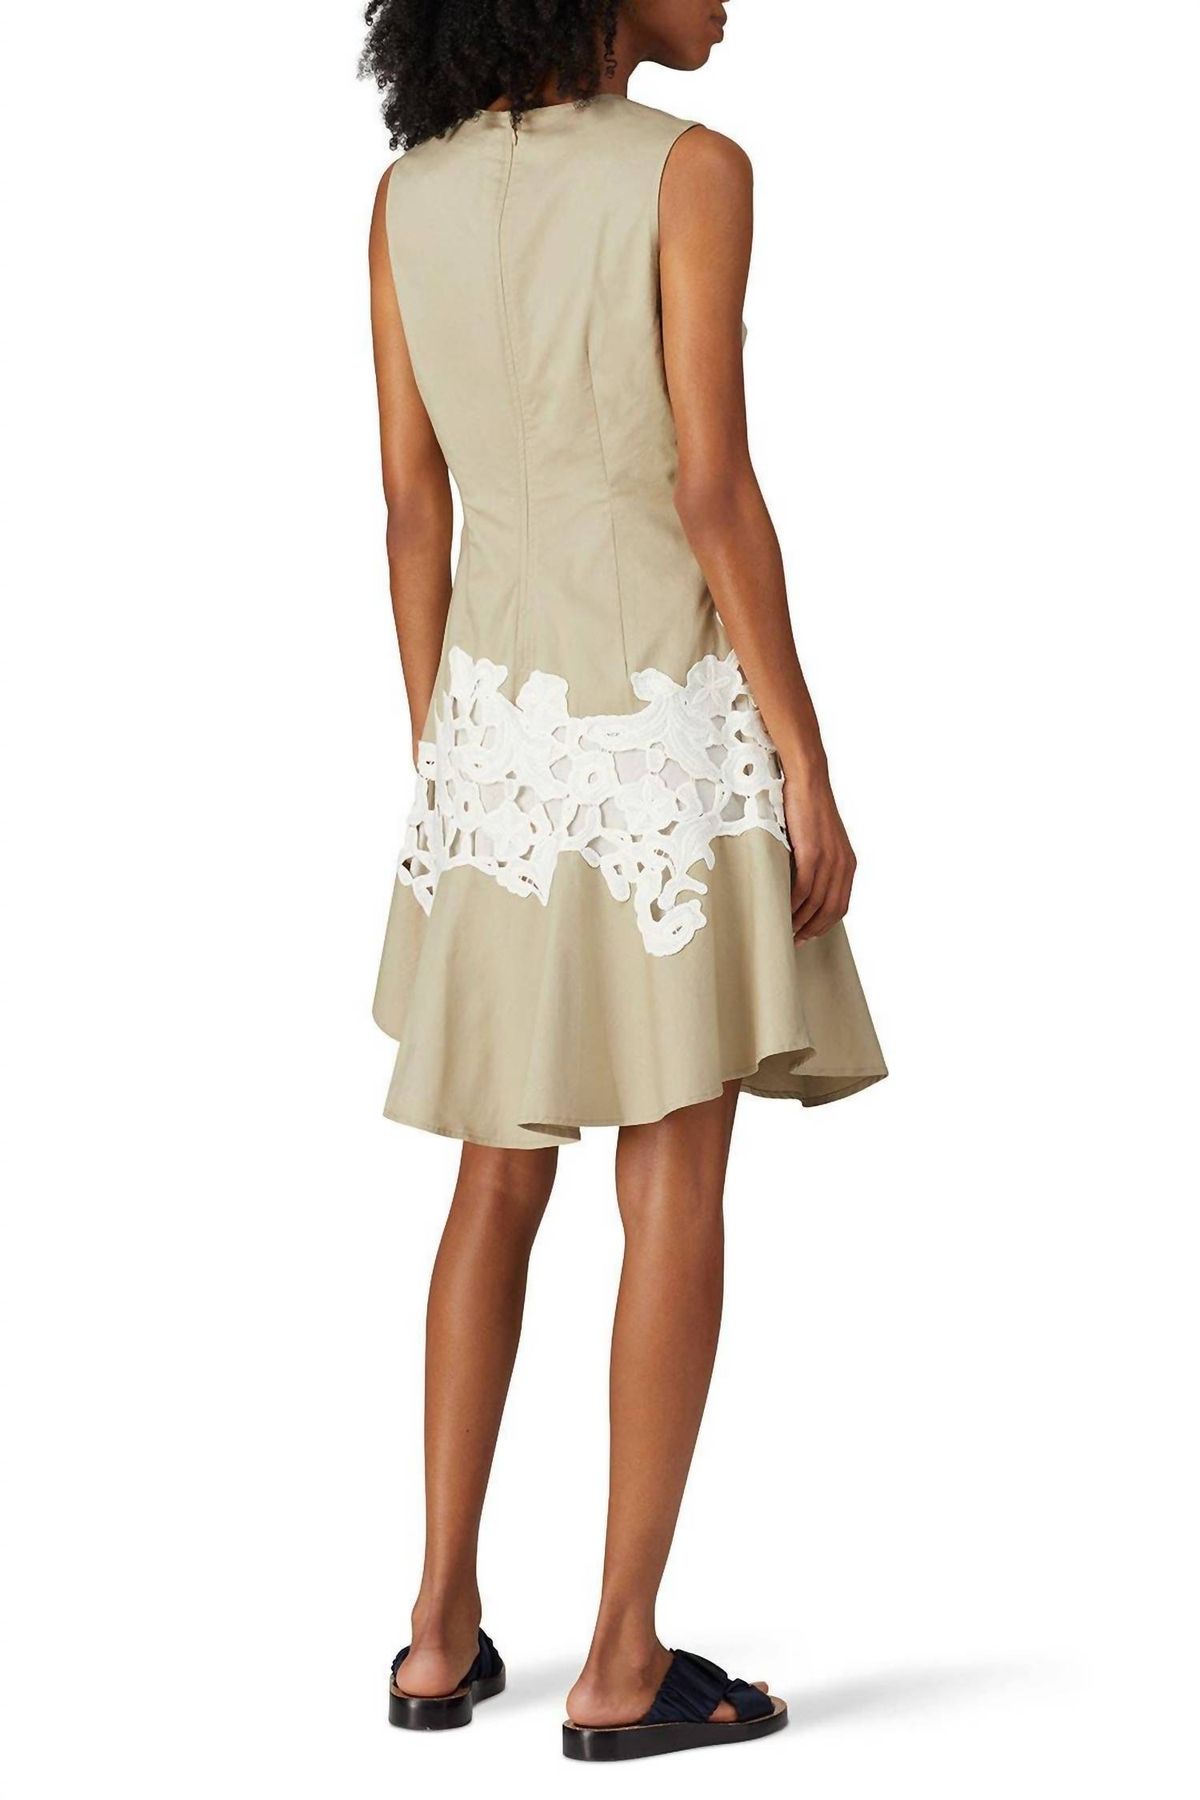 Style 1-3036452524-1339-1 Derek Lam 10 Crosby Plus Size 38 Lace Nude Cocktail Dress on Queenly